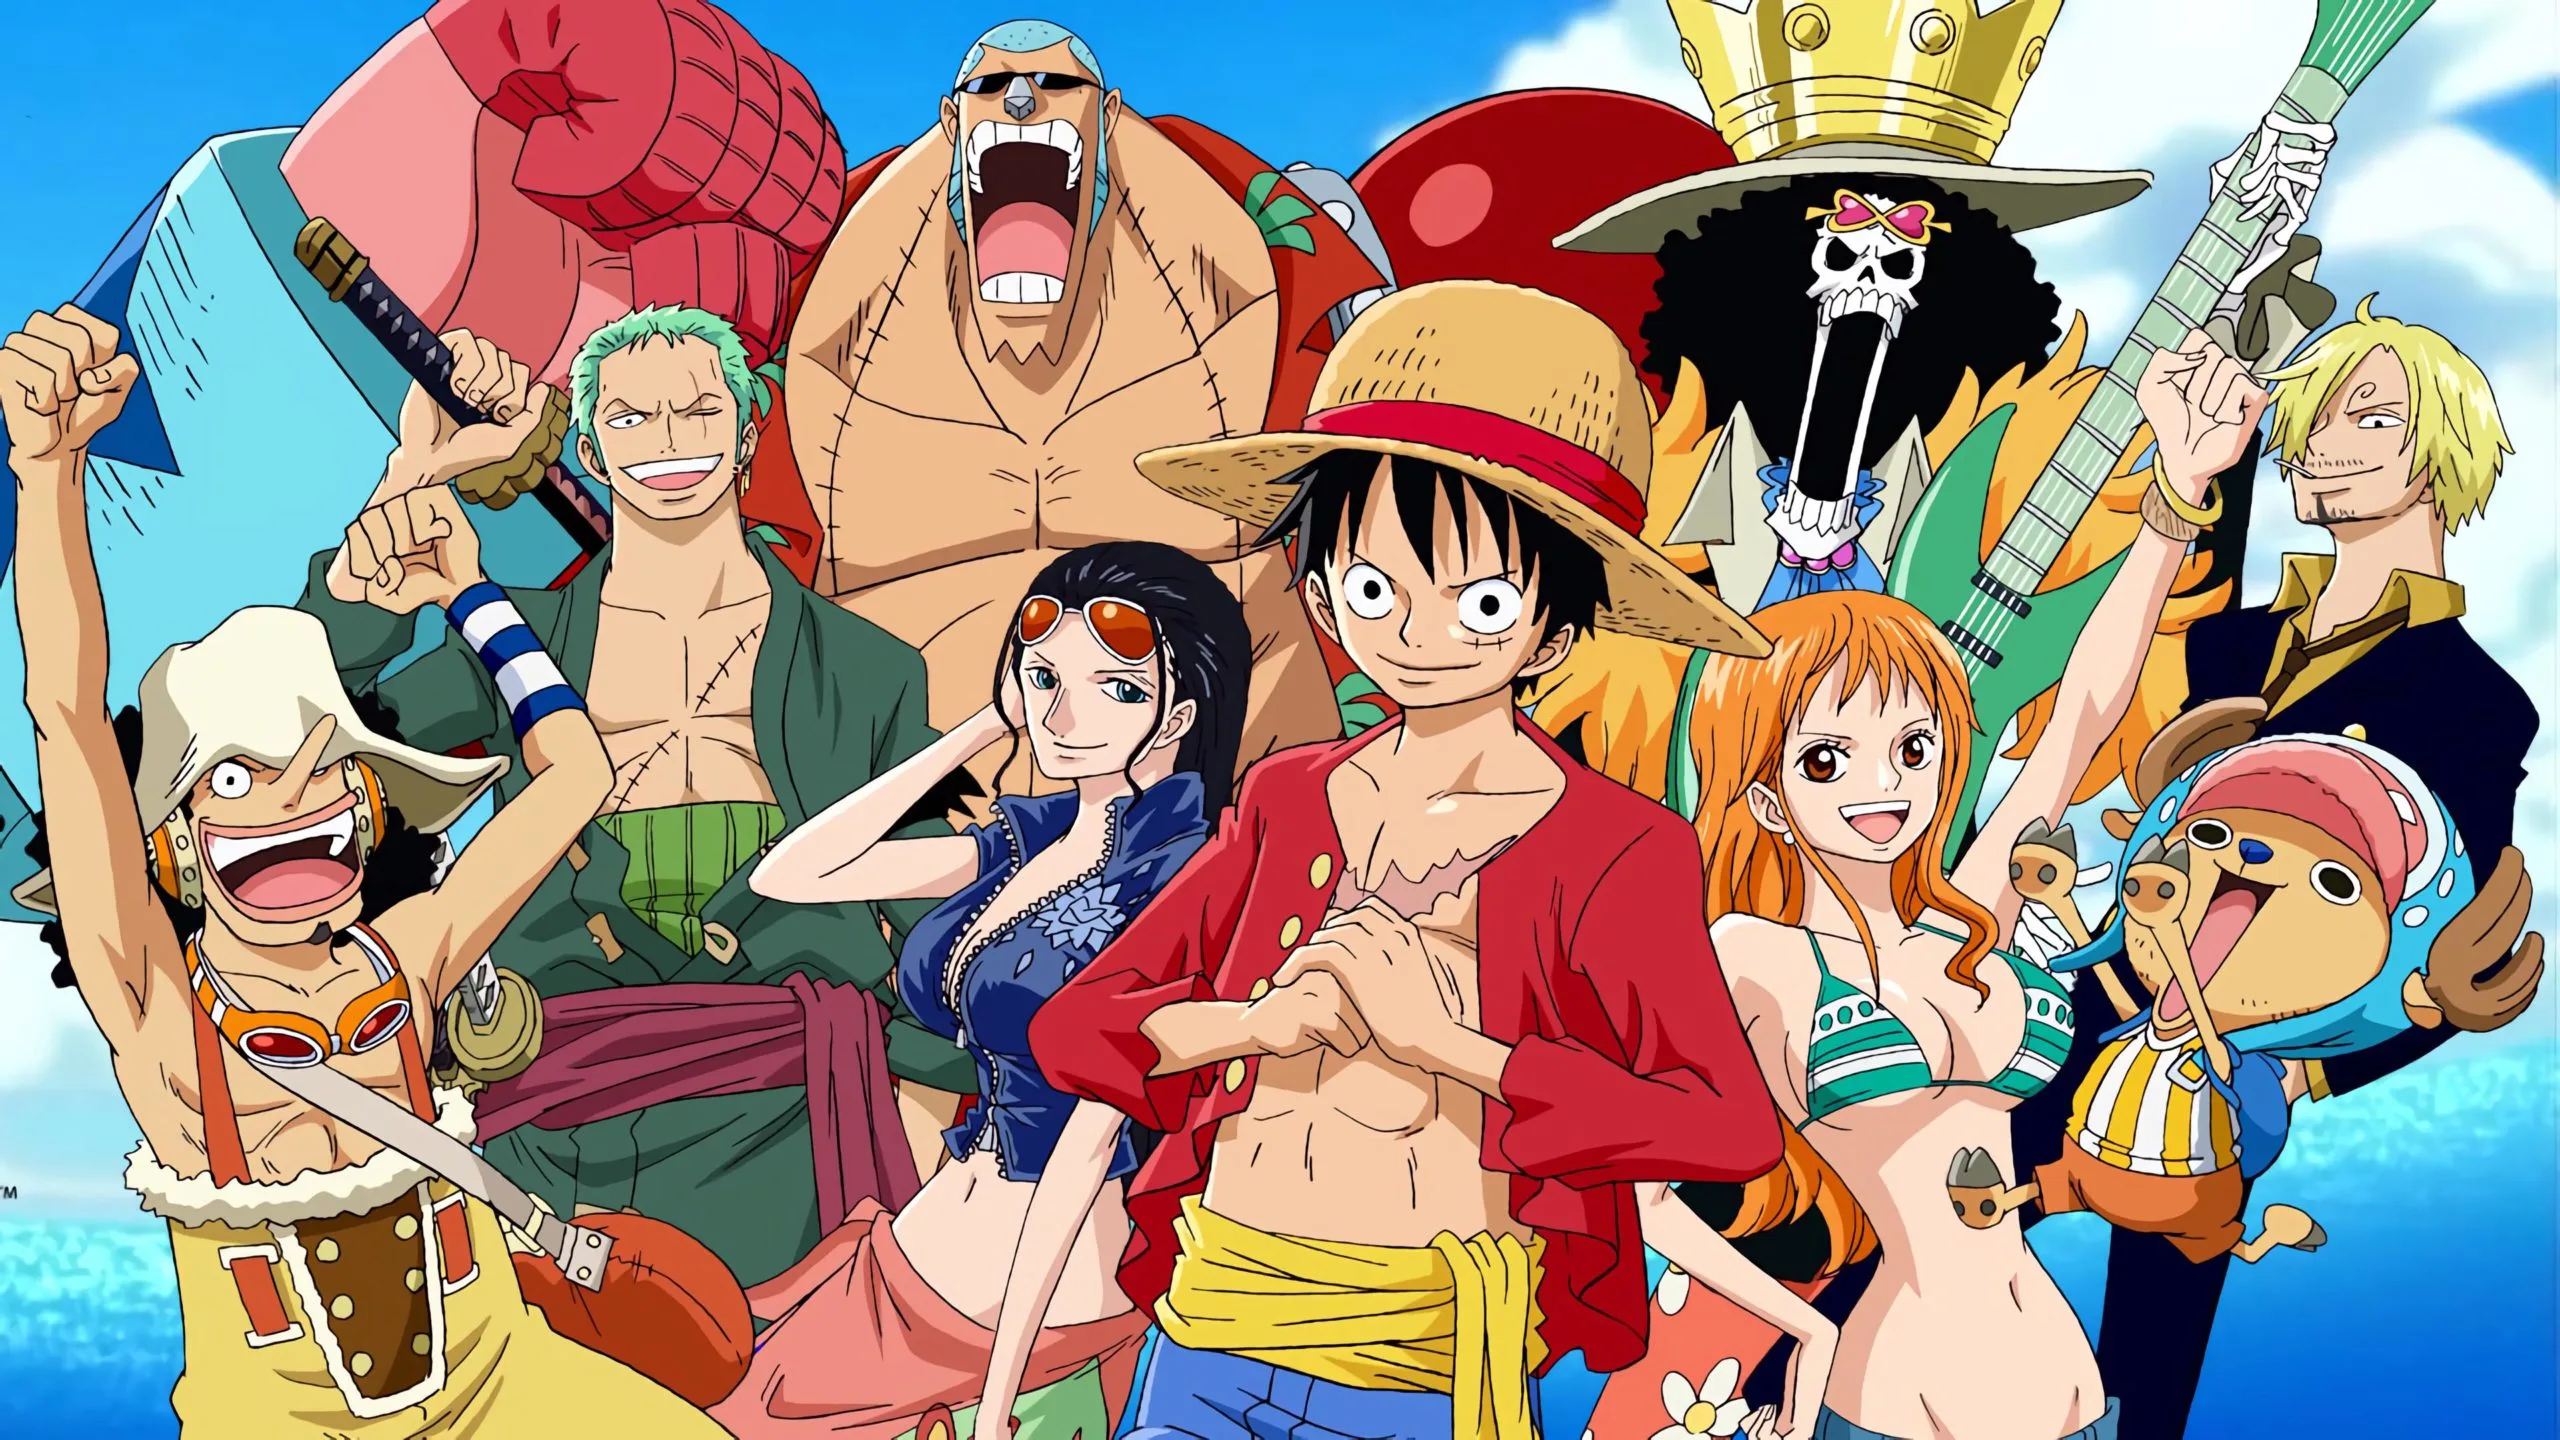 Image of One Piece